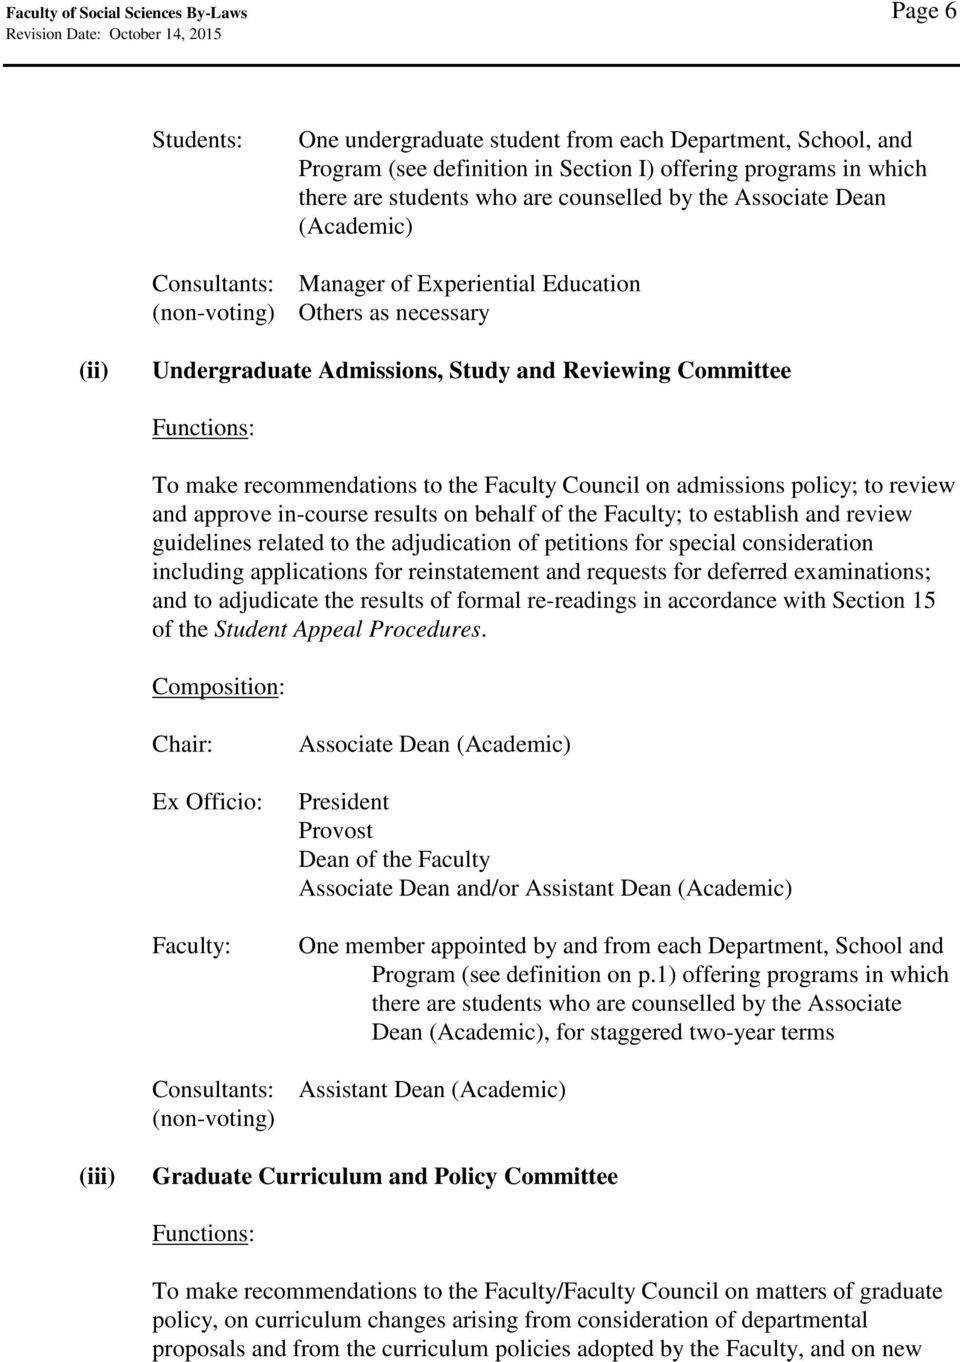 recommendations to the Faculty Council on admissions policy; to review and approve in-course results on behalf of the Faculty; to establish and review guidelines related to the adjudication of